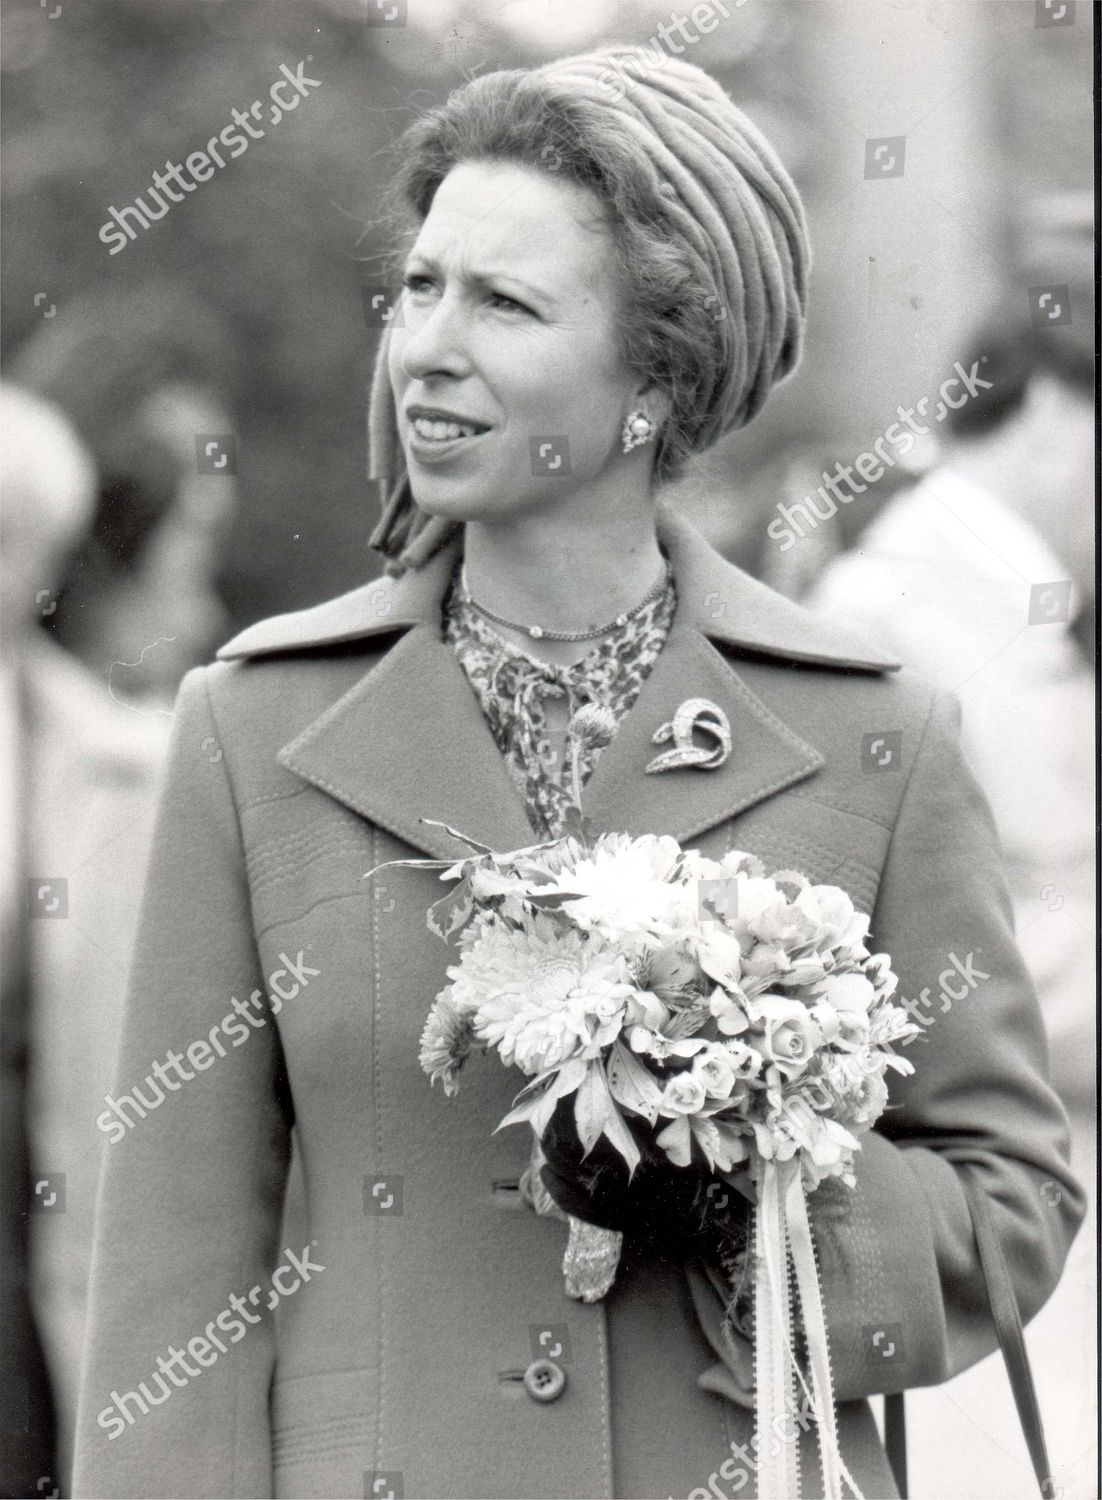 princess-anne-now-princess-royal-1984-picture-shows-princess-anne-visiting-the-st-erme-autistic-centre-at-truro-cornwall-shutterstock-editorial-1040433a.jpg